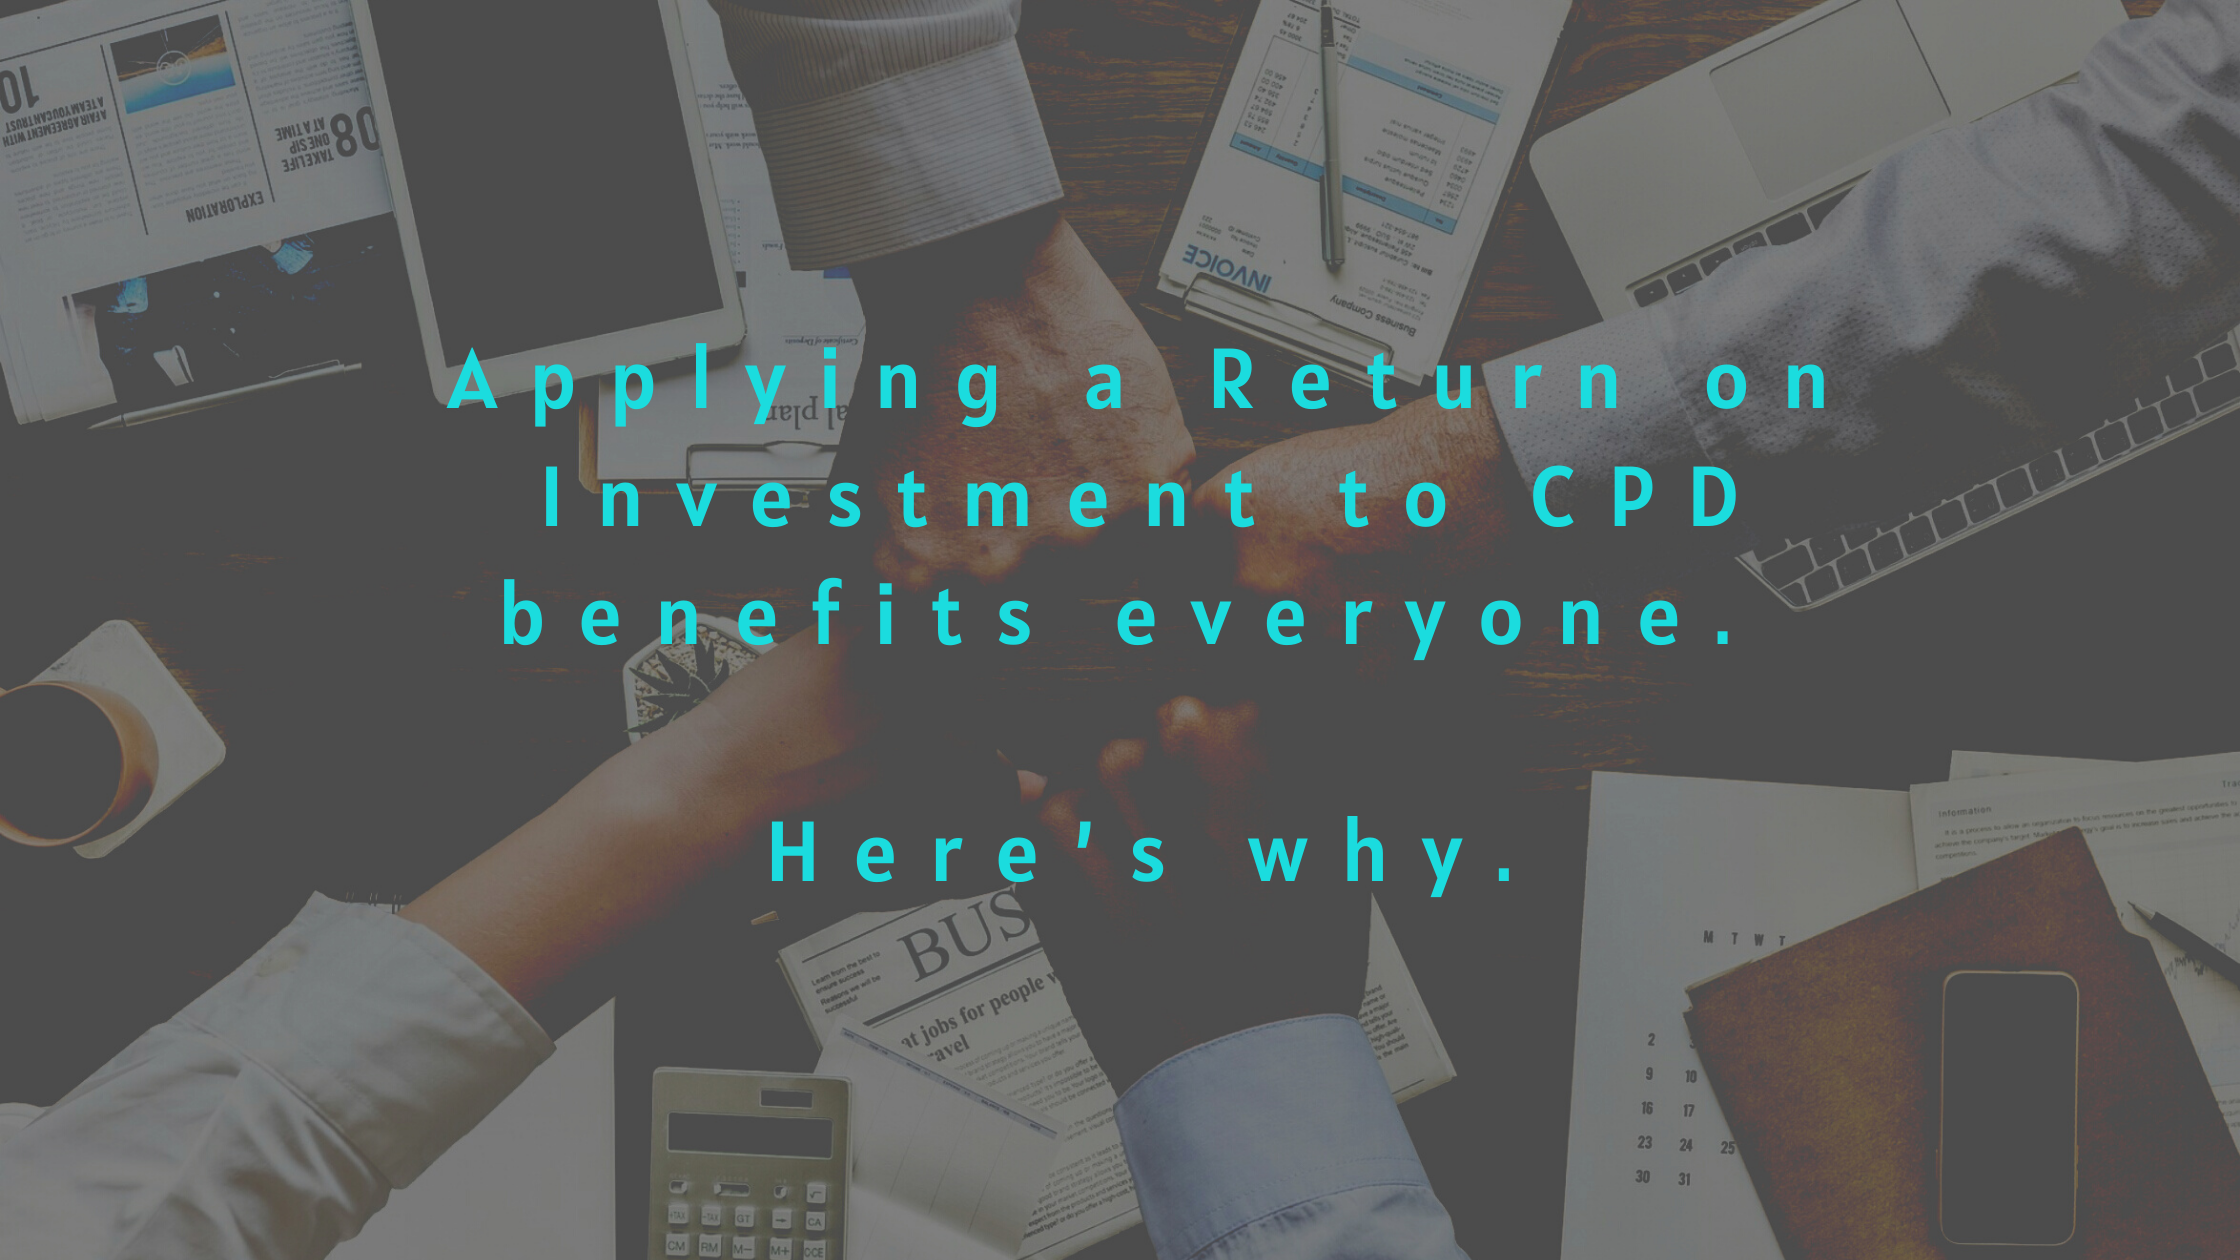 Applying a Return on Investment to CPD benefits everyone. Here’s why.